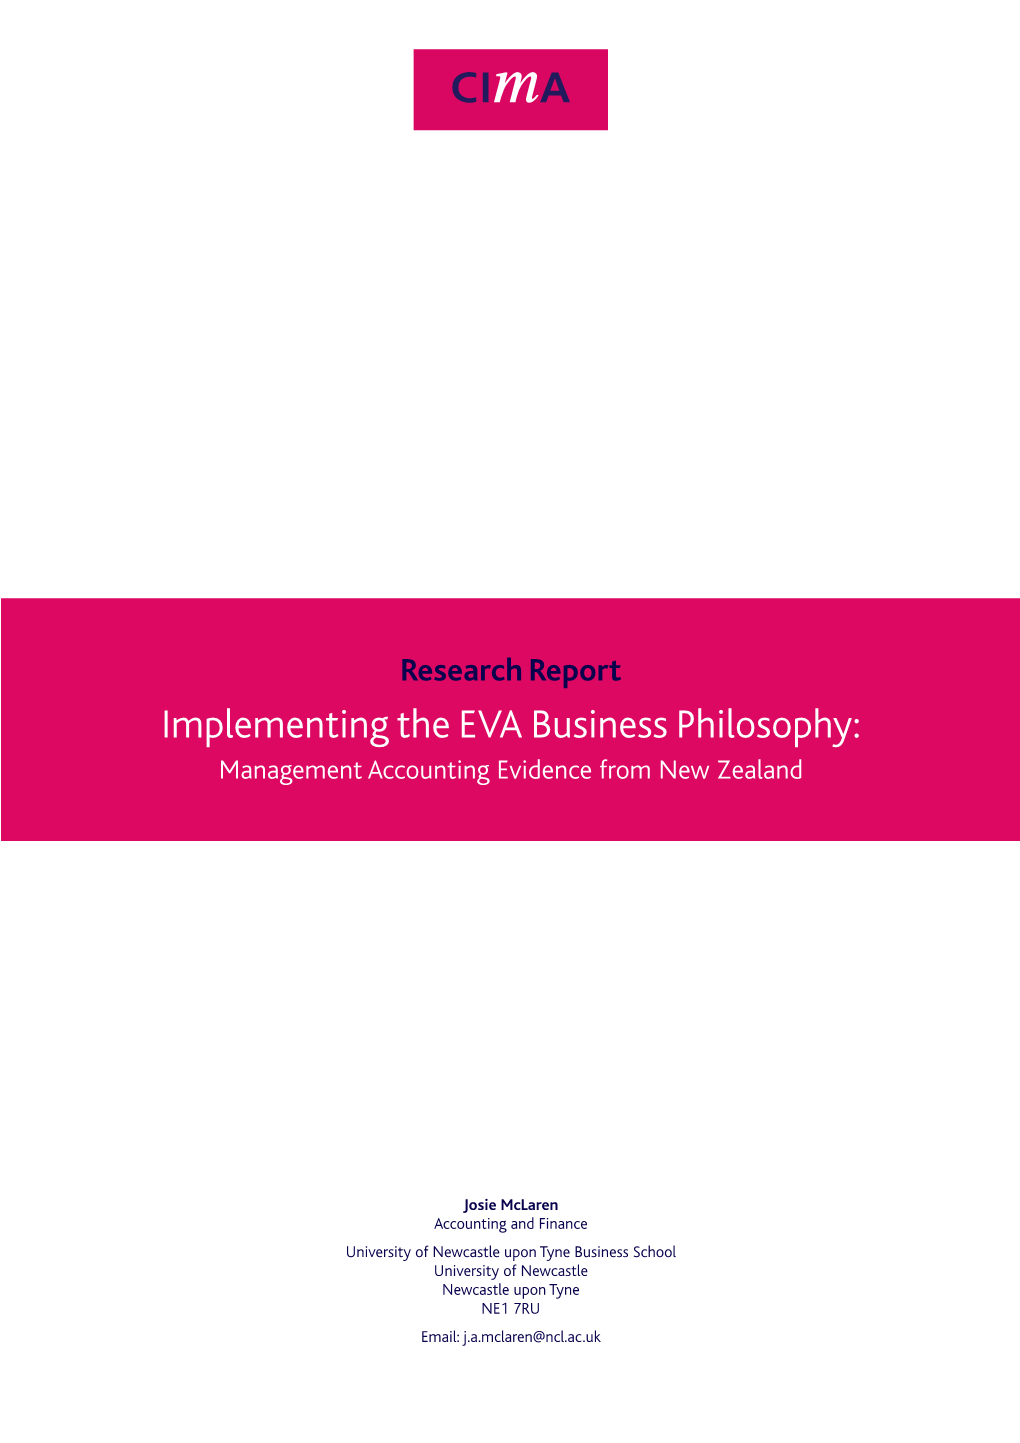 Implementing the EVA Business Philosophy: Management Accounting Evidence from New Zealand